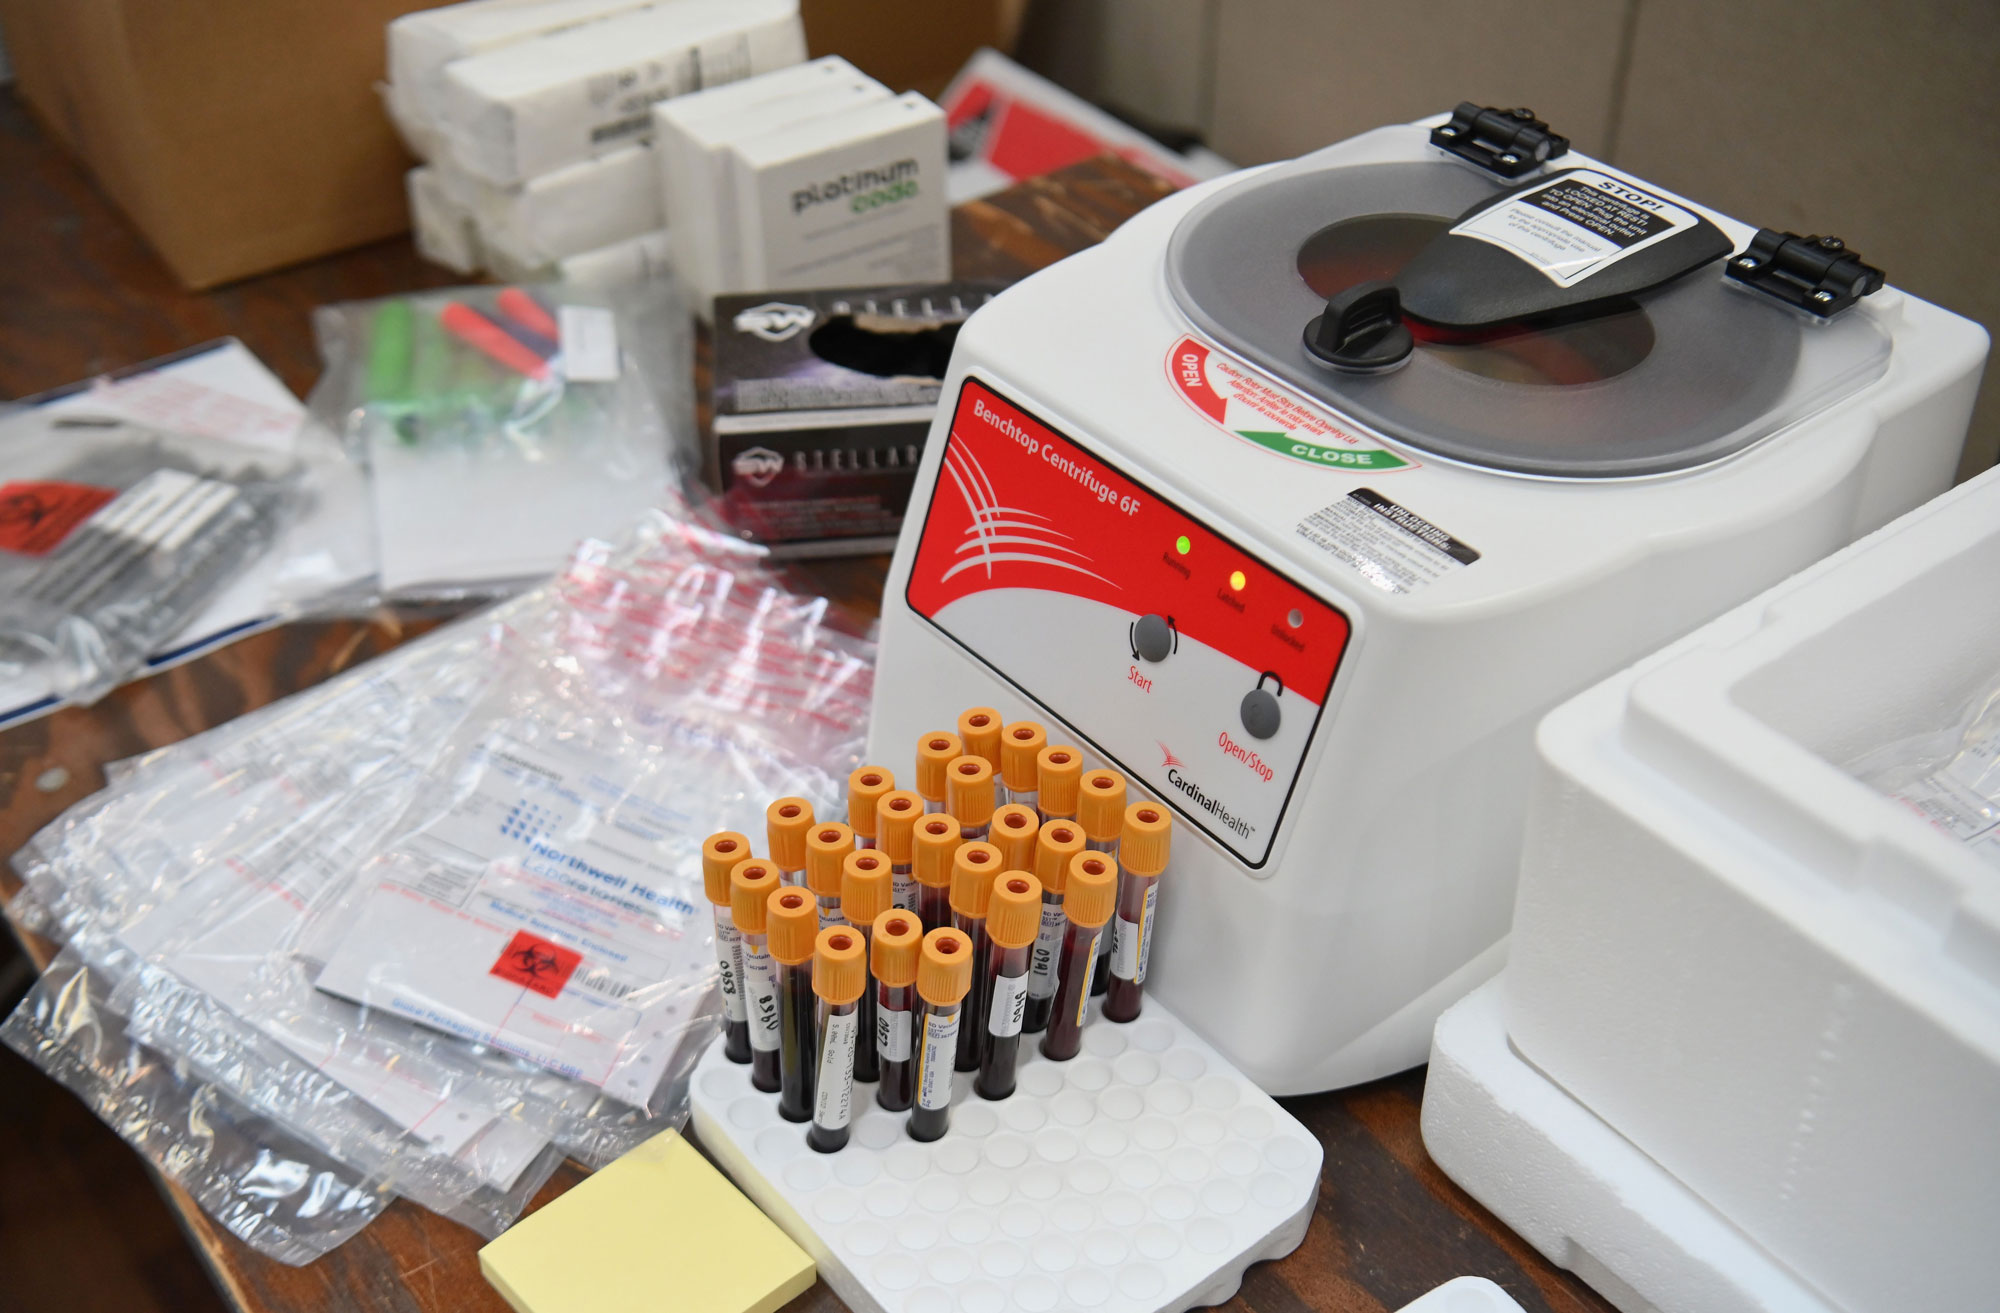 A centrifuge and blood samples to test for COVID-19 antibodies sit on table at Abyssinian Baptist Church in the Harlem neighborhood of New York City on May 14.